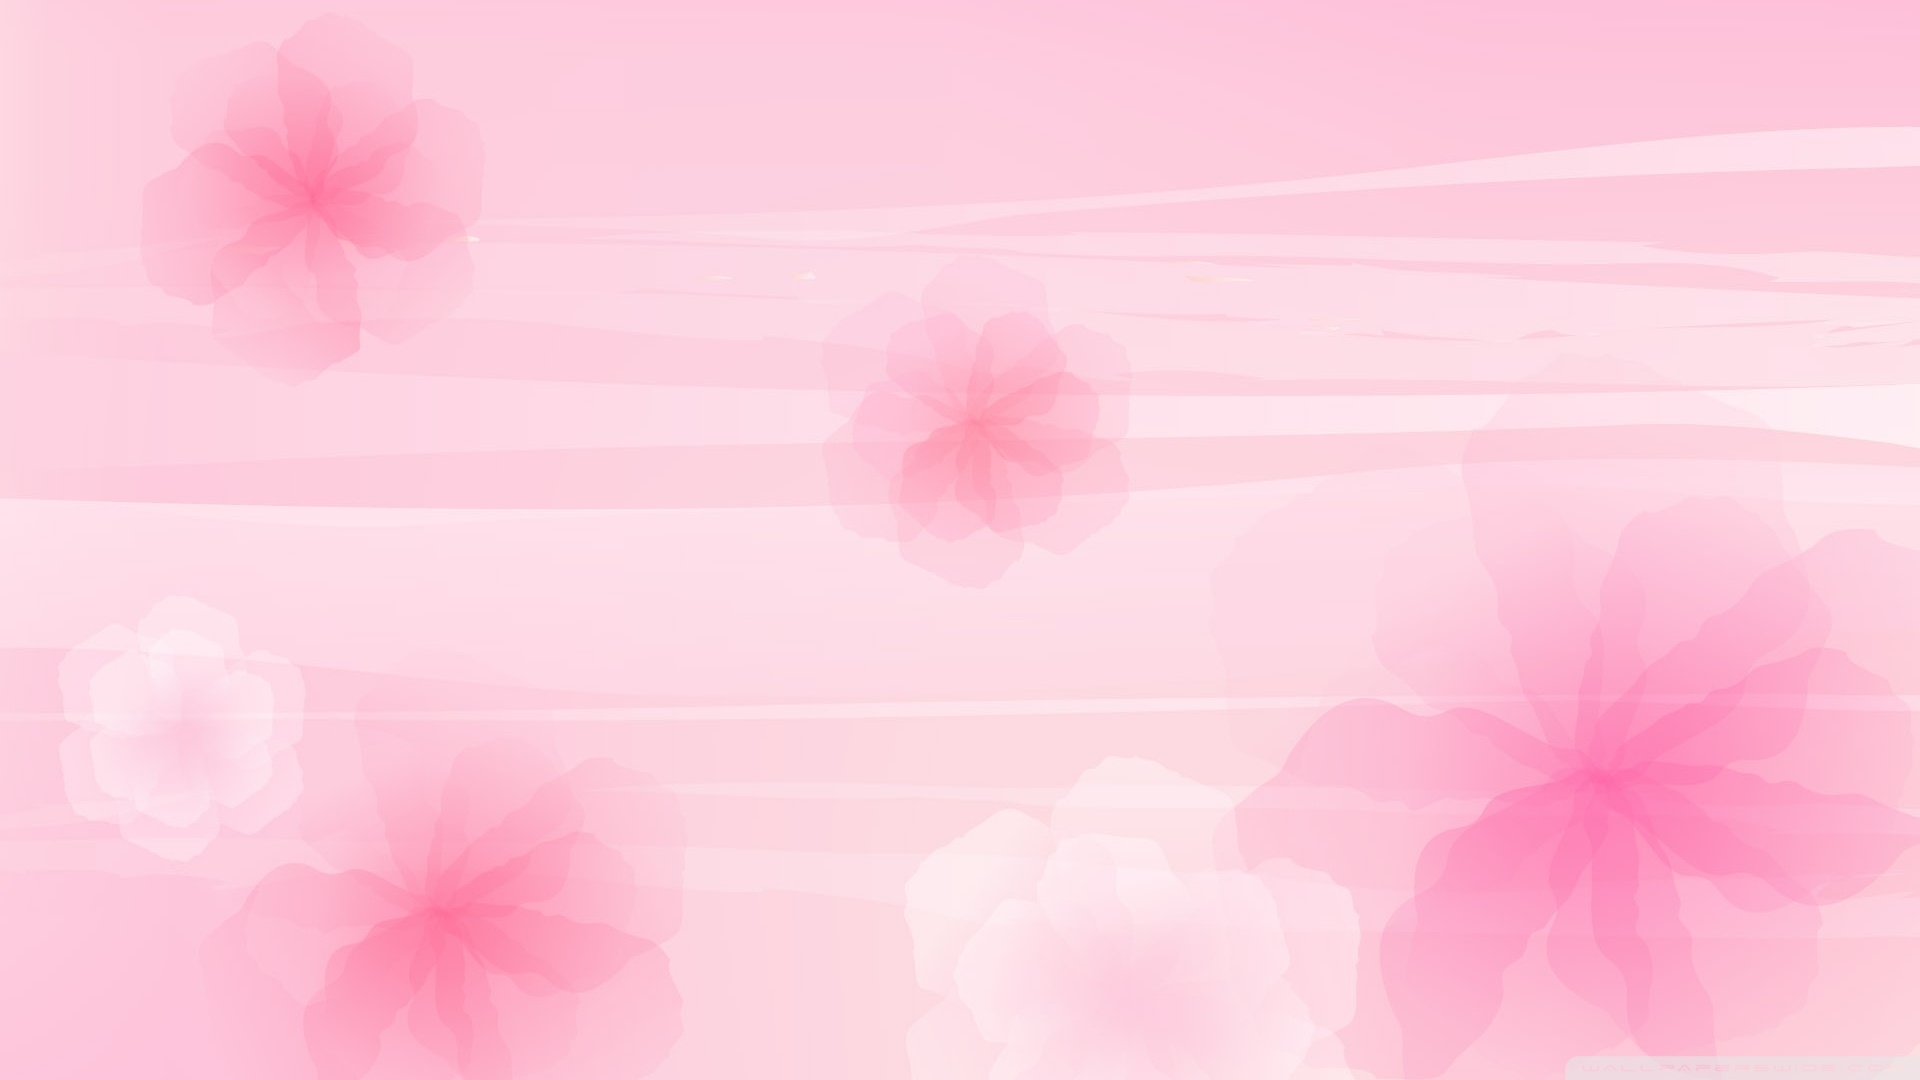 Pink Flowers Background Wallpaper